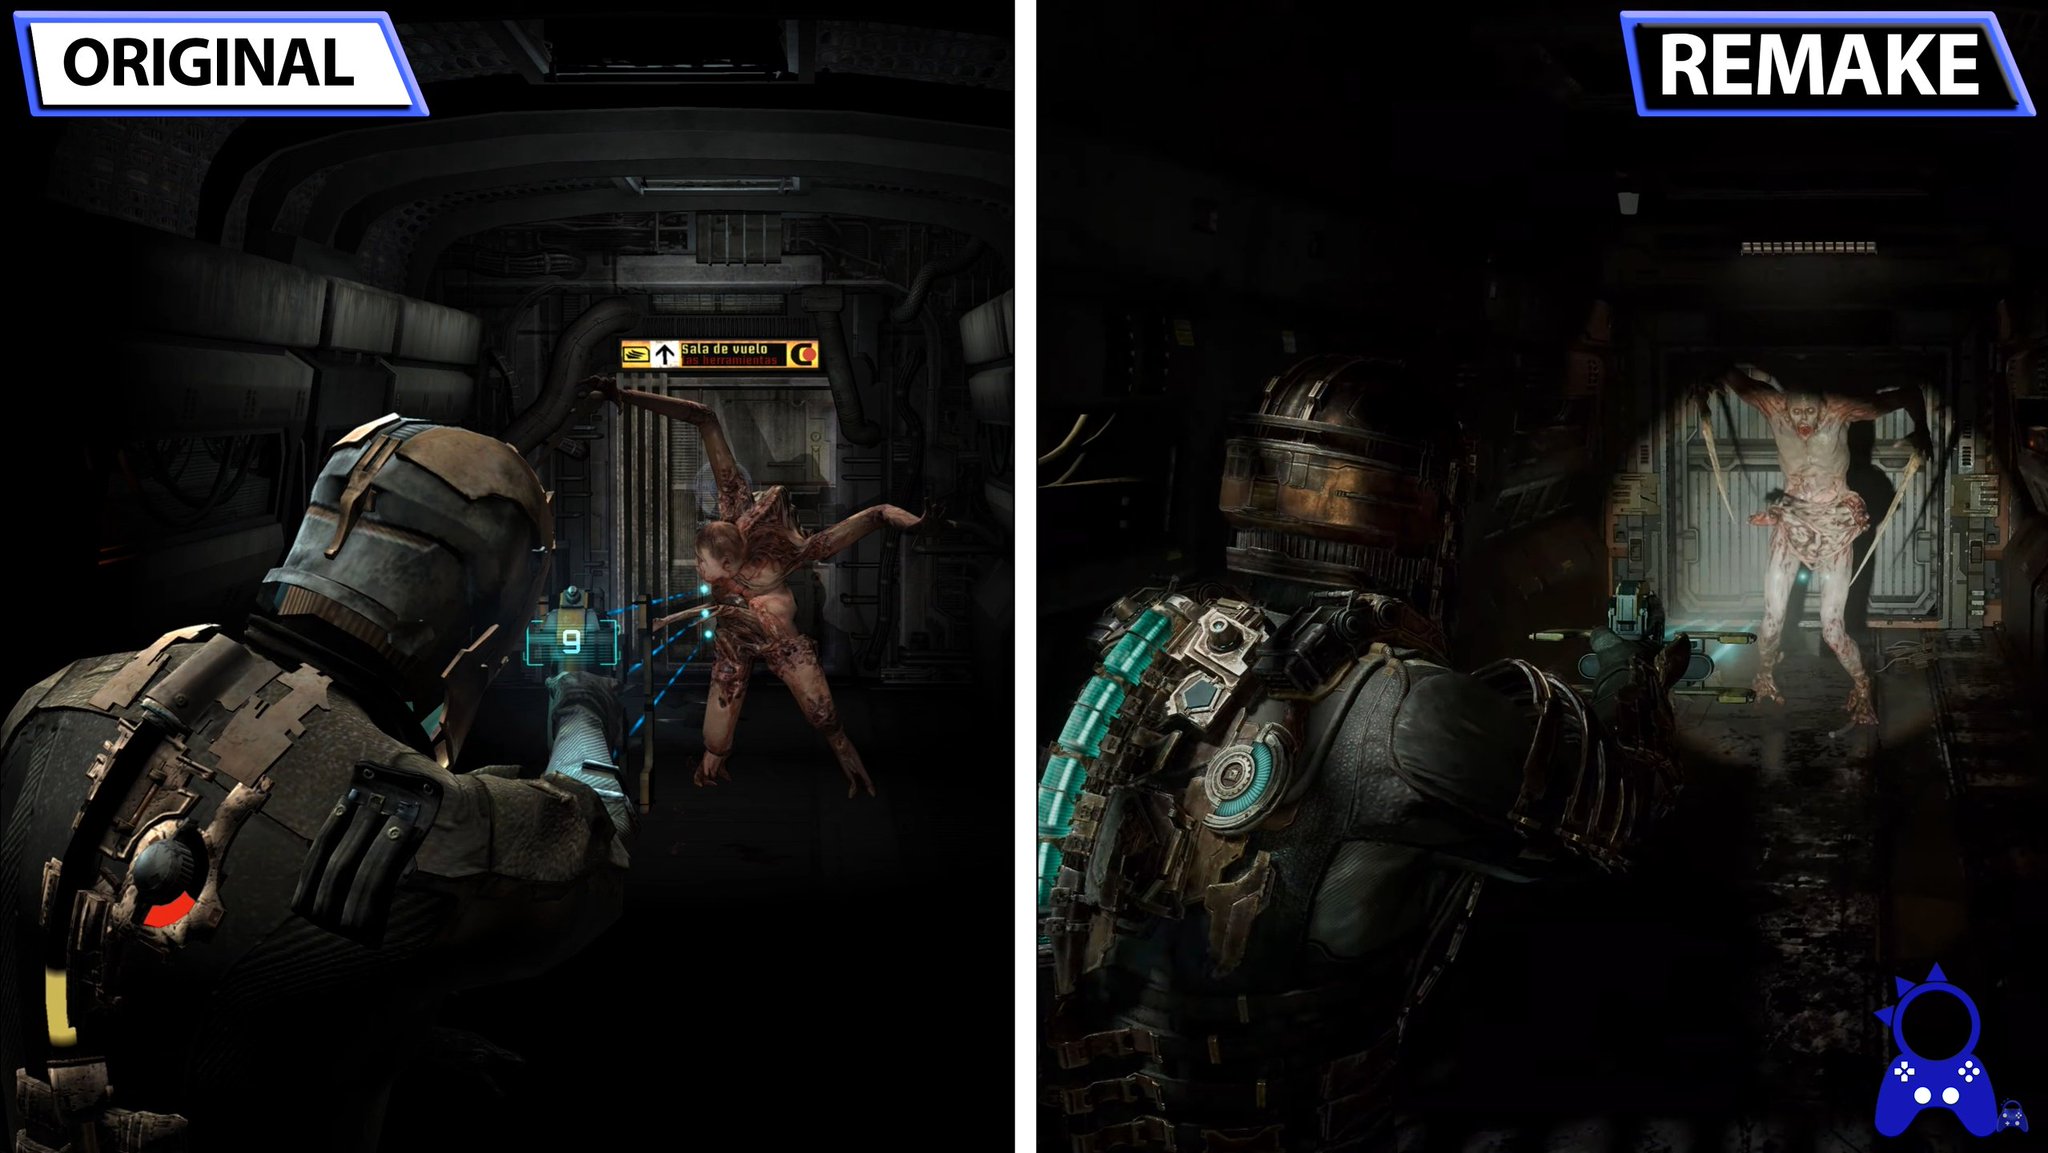 Dead Space Remake Early Comparison Highlights Massive Visual